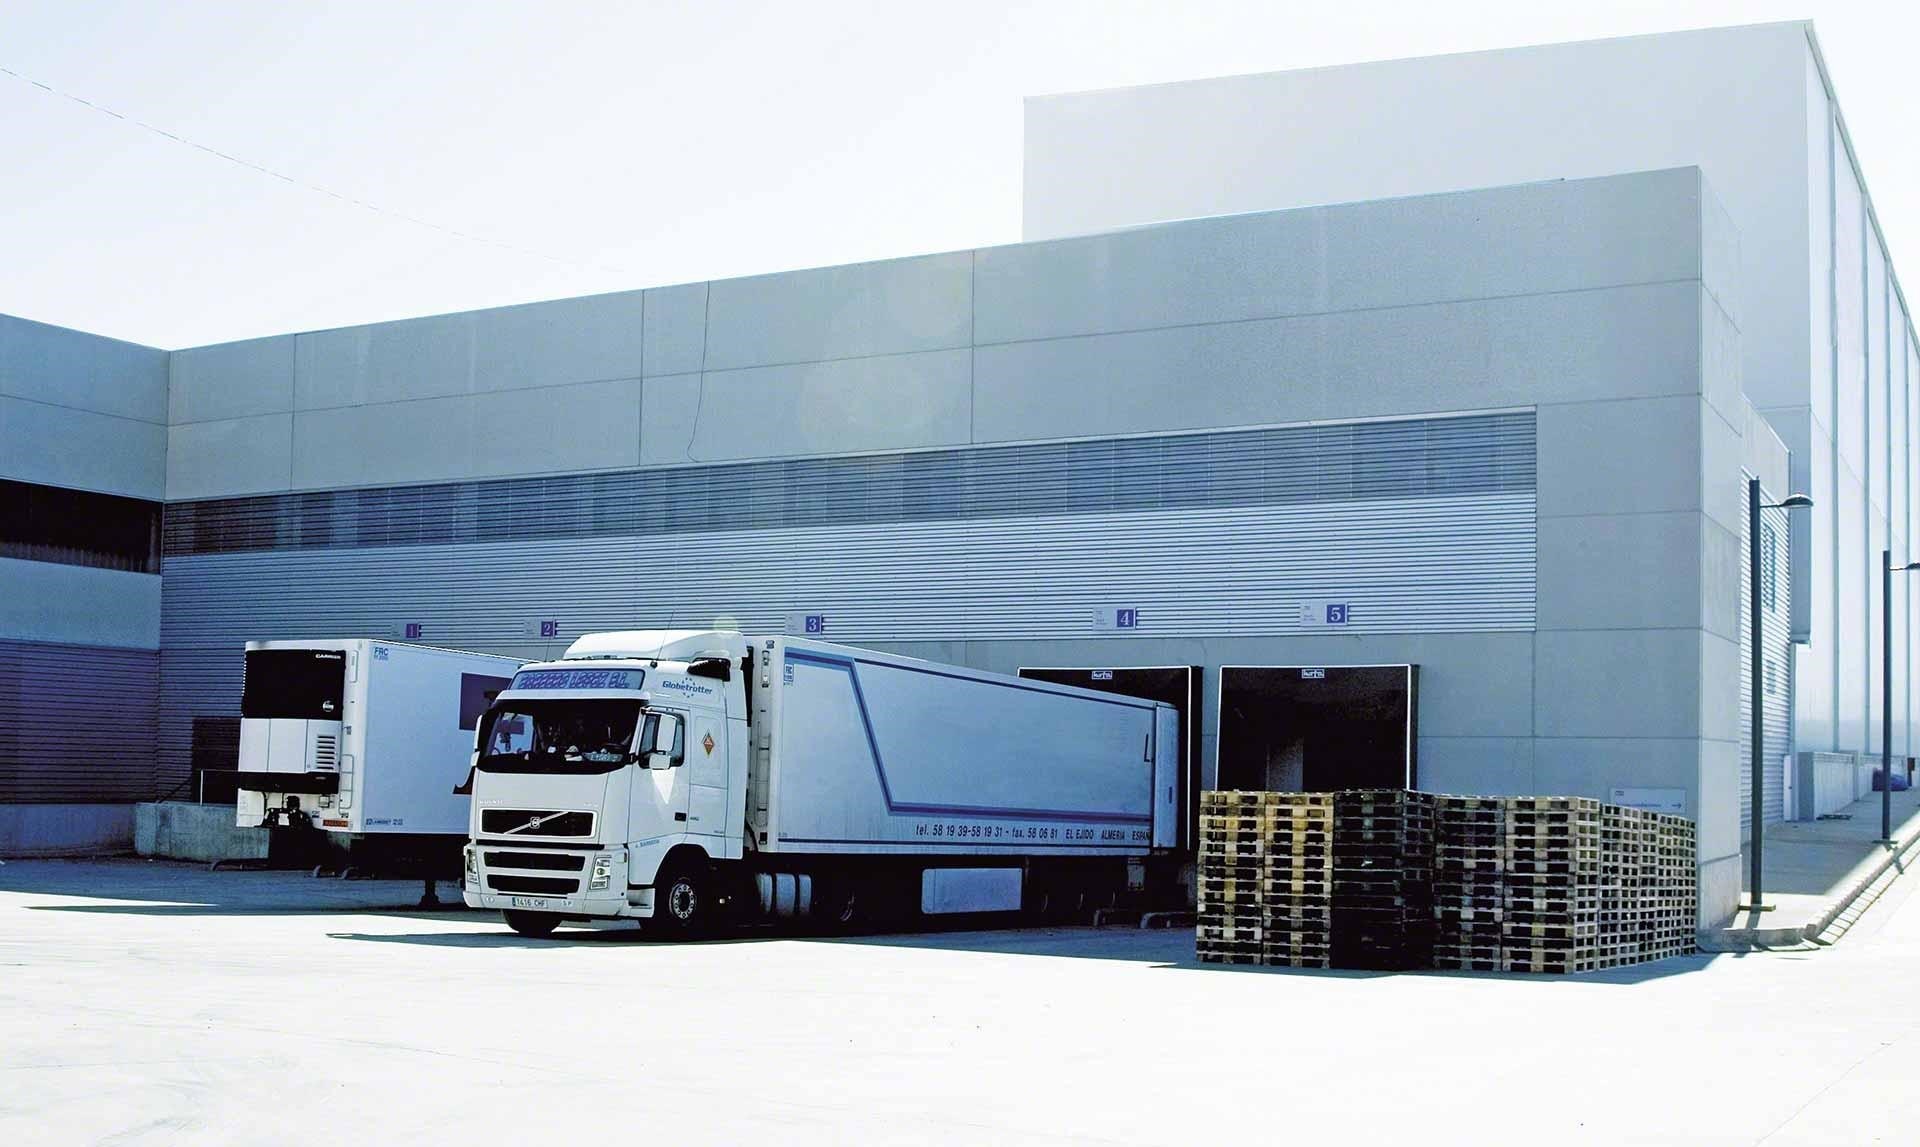 Trucks unload goods in the warehouse as part of cross-docking operations